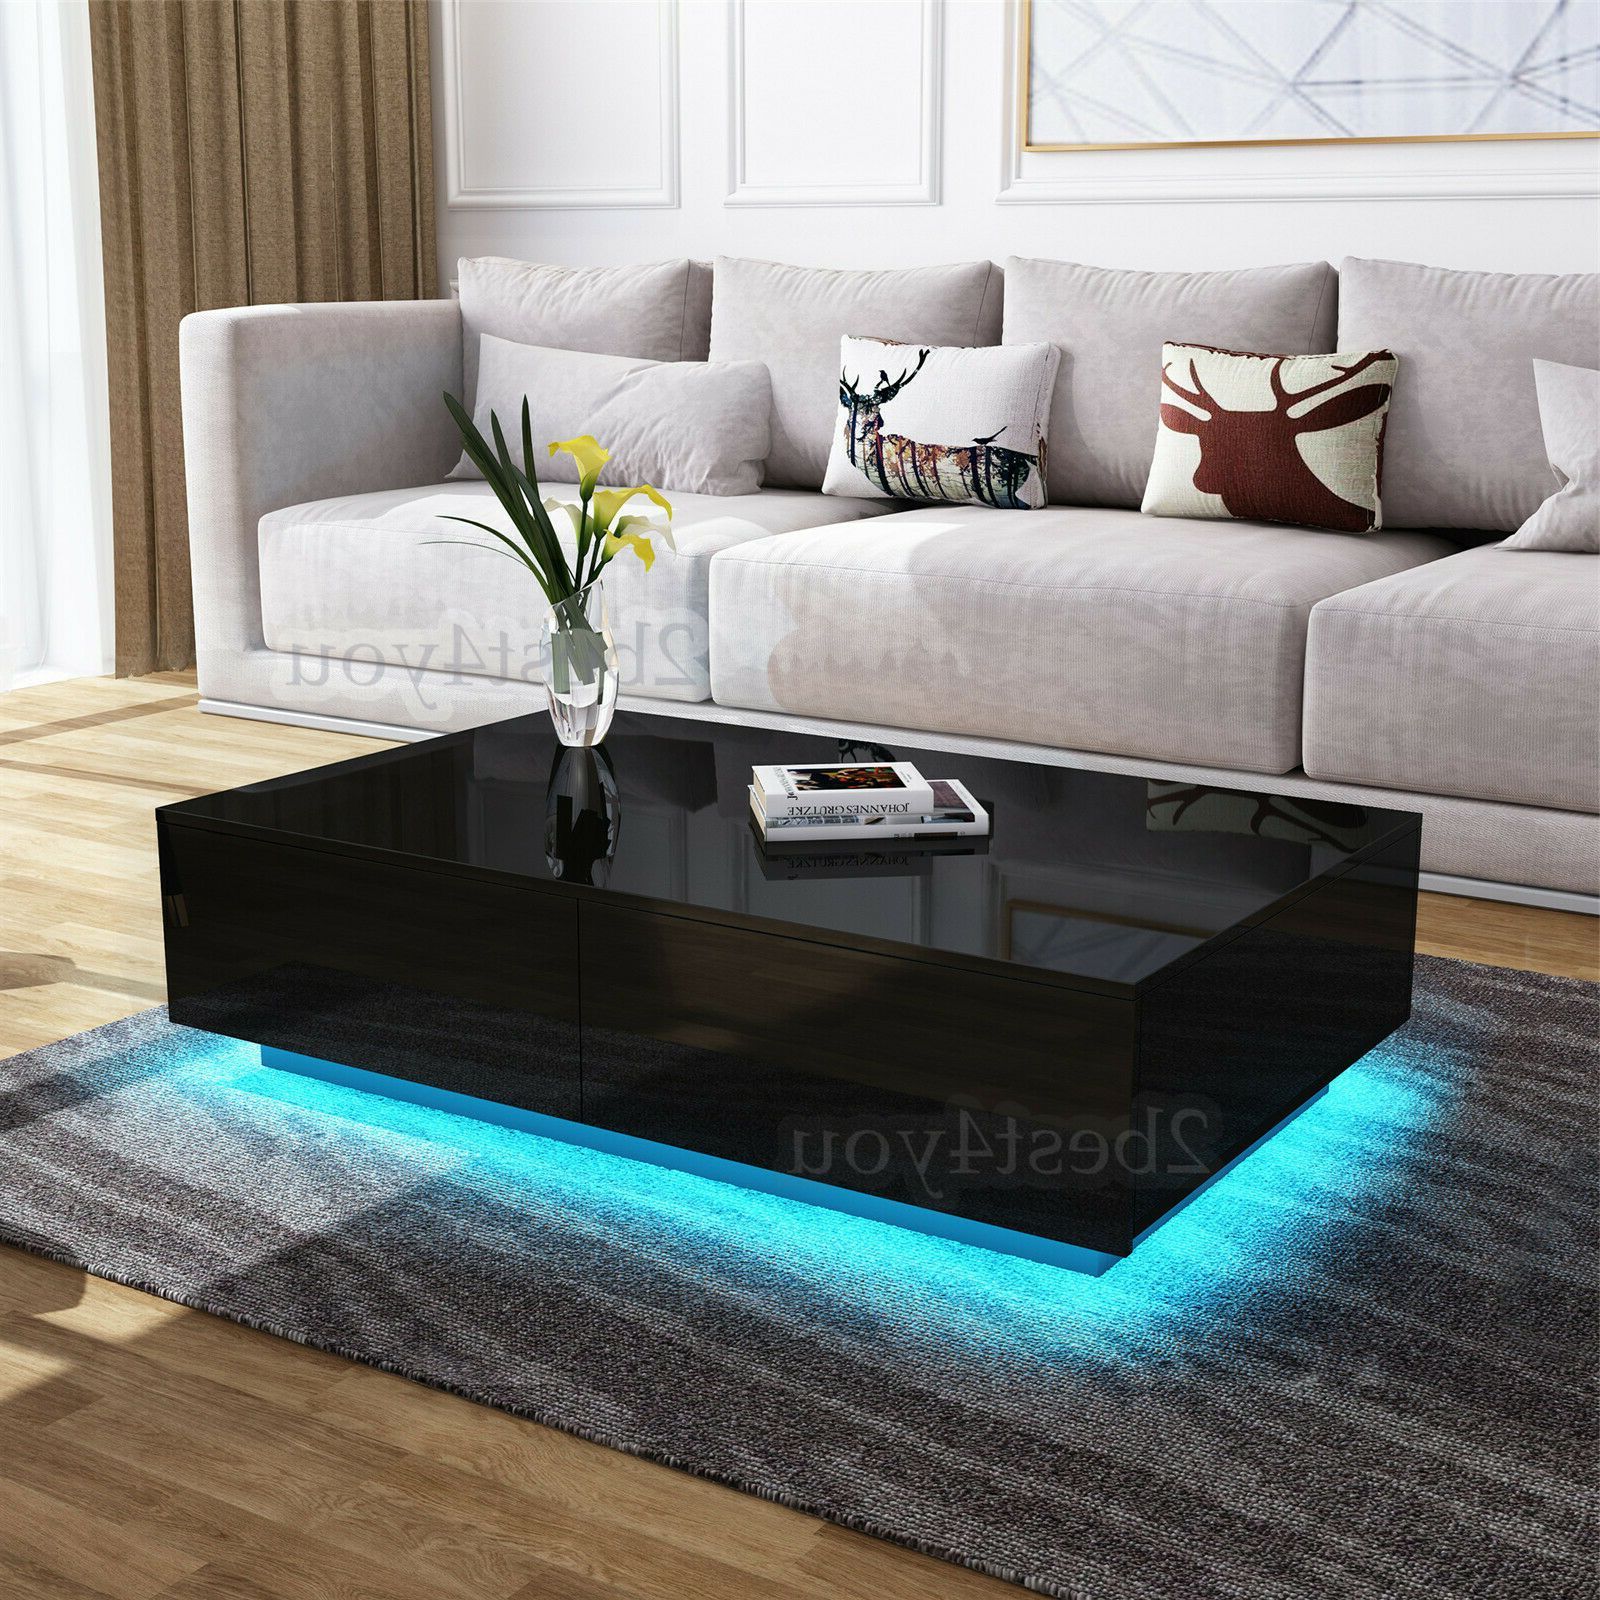 Modern Coffee Table With Led Lights – Stellabracy For Coffee Tables With Led Lights (Gallery 16 of 20)